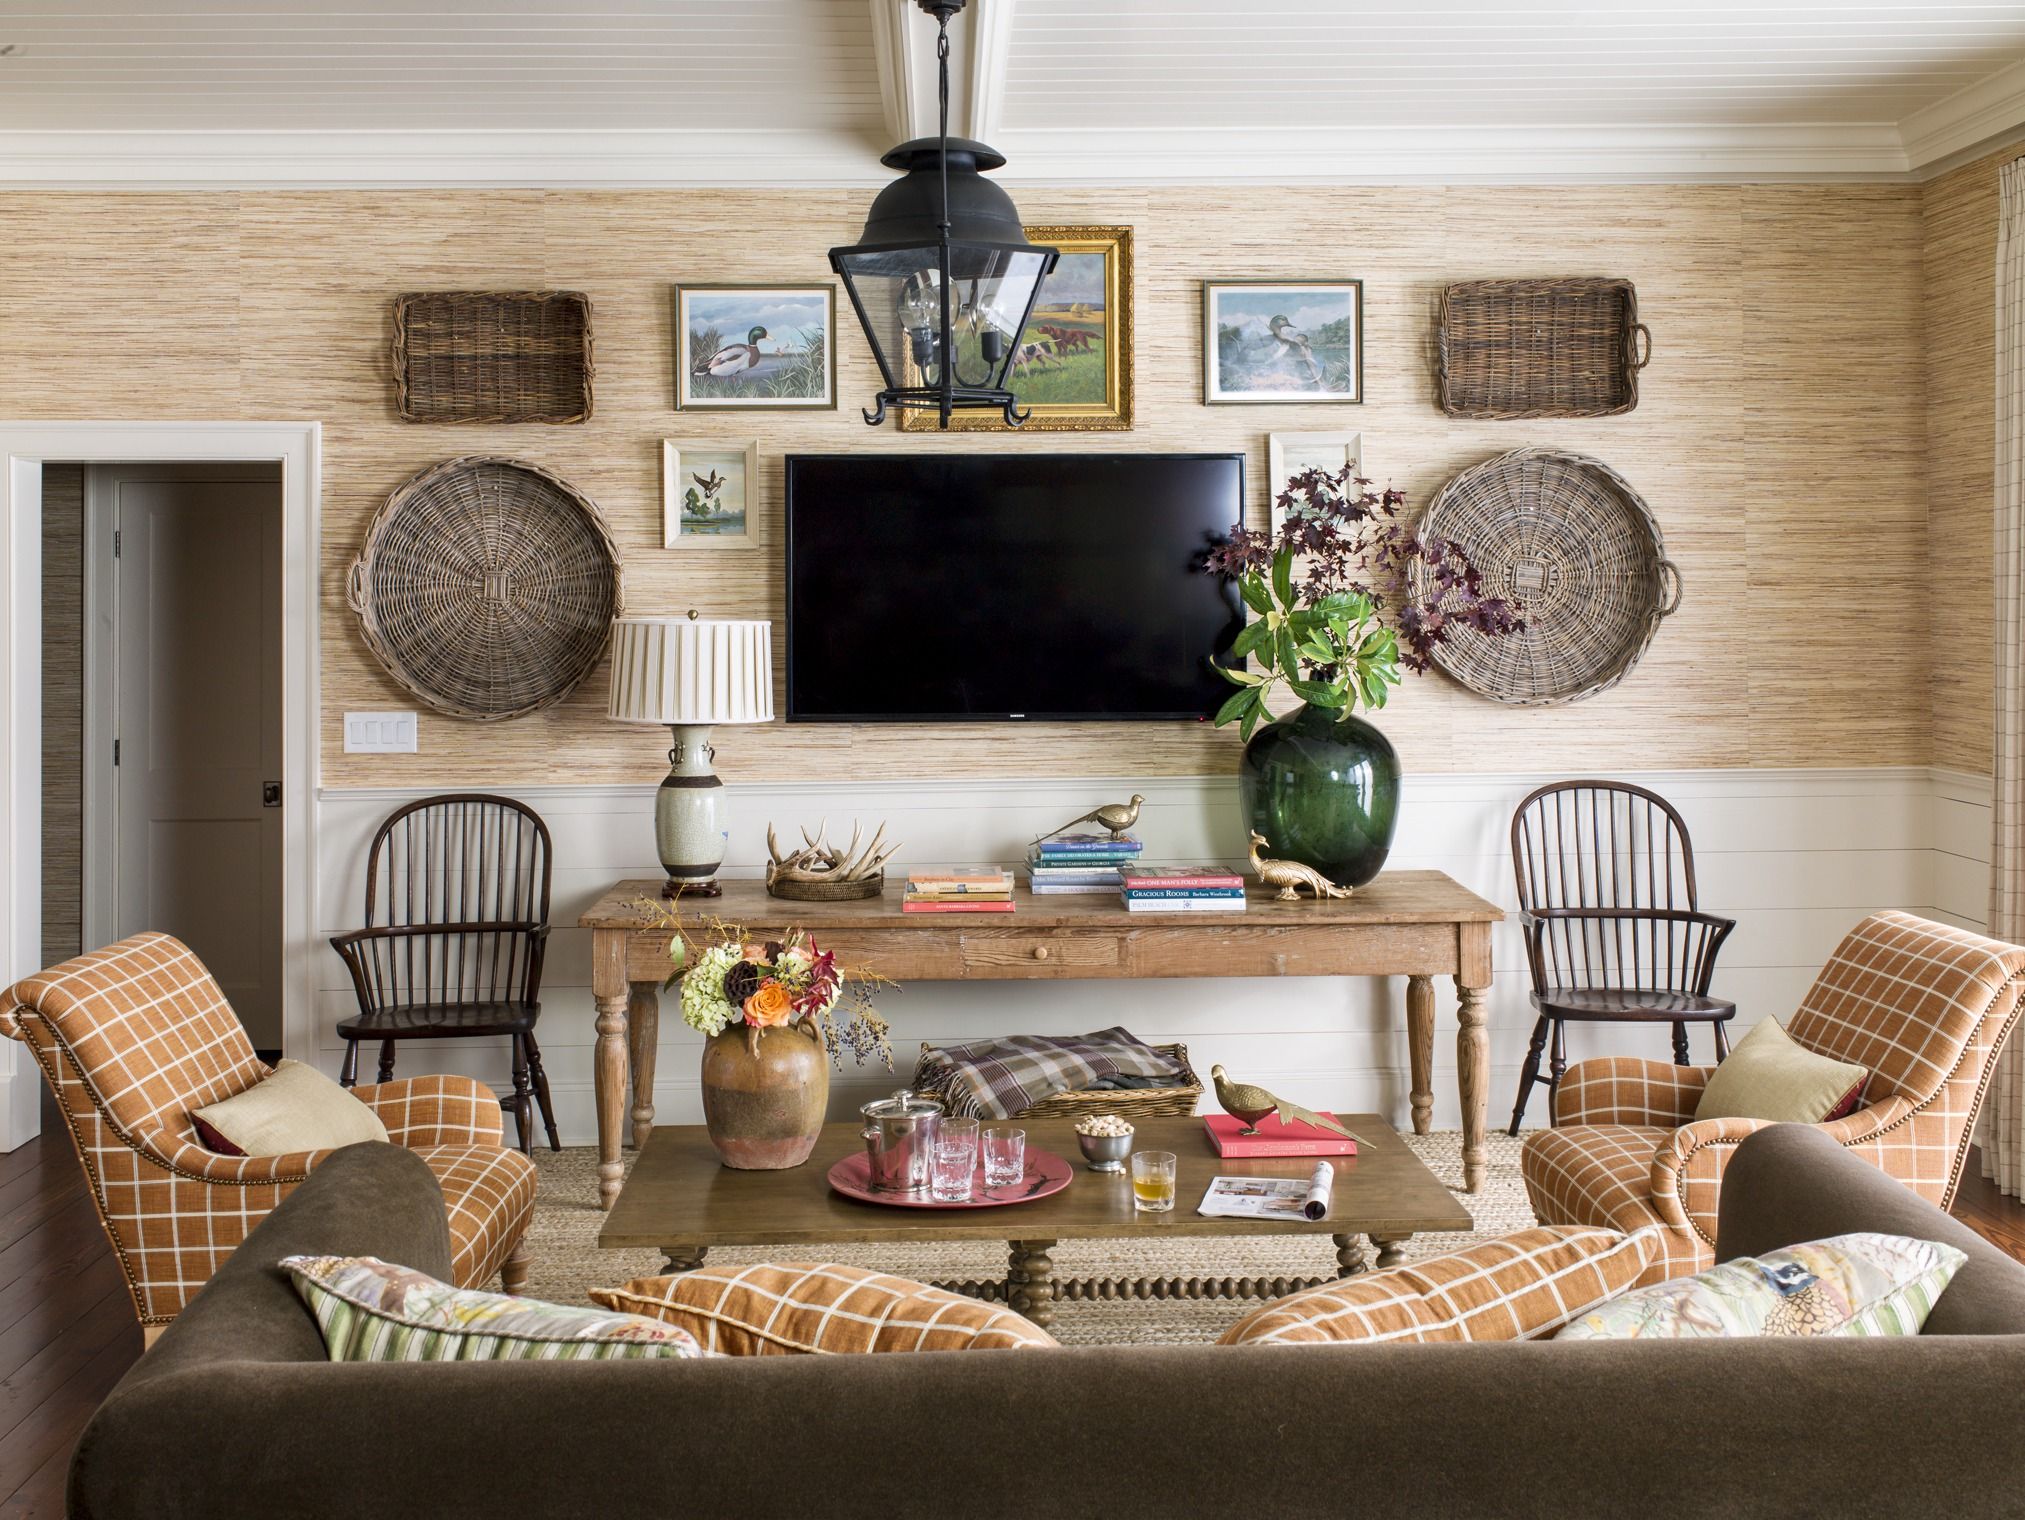 25 Rustic Living Room Ideas Modern, Rustic Country Living Room Decorating Ideas